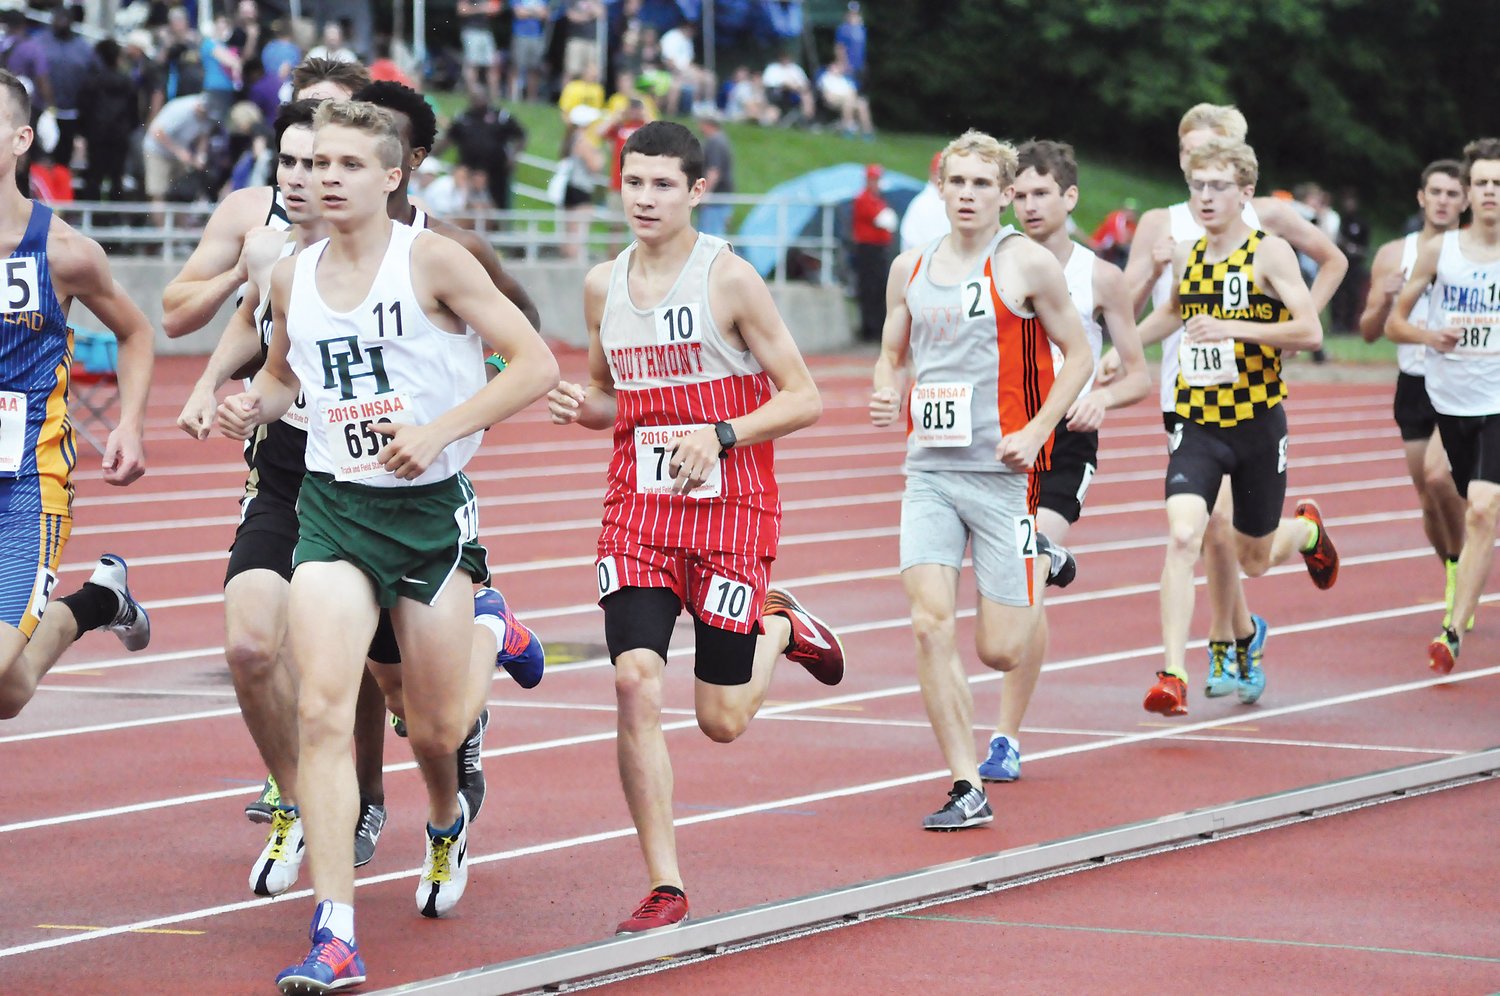 Southmont grad Brooks Long qualified twice for the track and field state finals in the mile run.